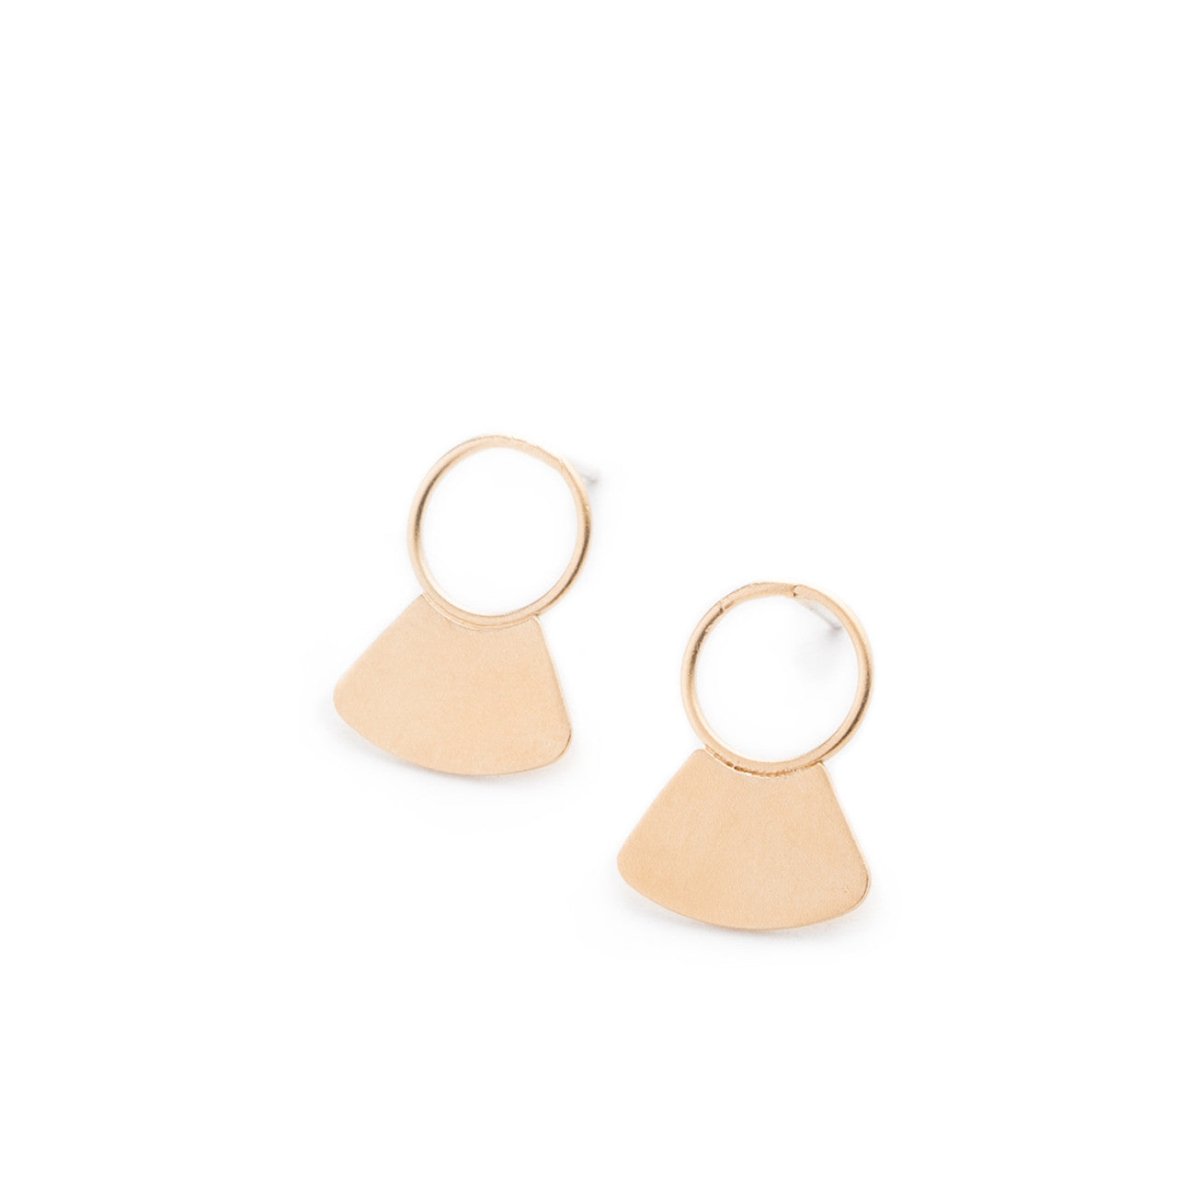 Small, 14k gold-plated studs, featuring a delicate, open circle with a solid fan shape at the base, and sterling silver earring posts. Hand-crafted in Portland, Oregon.